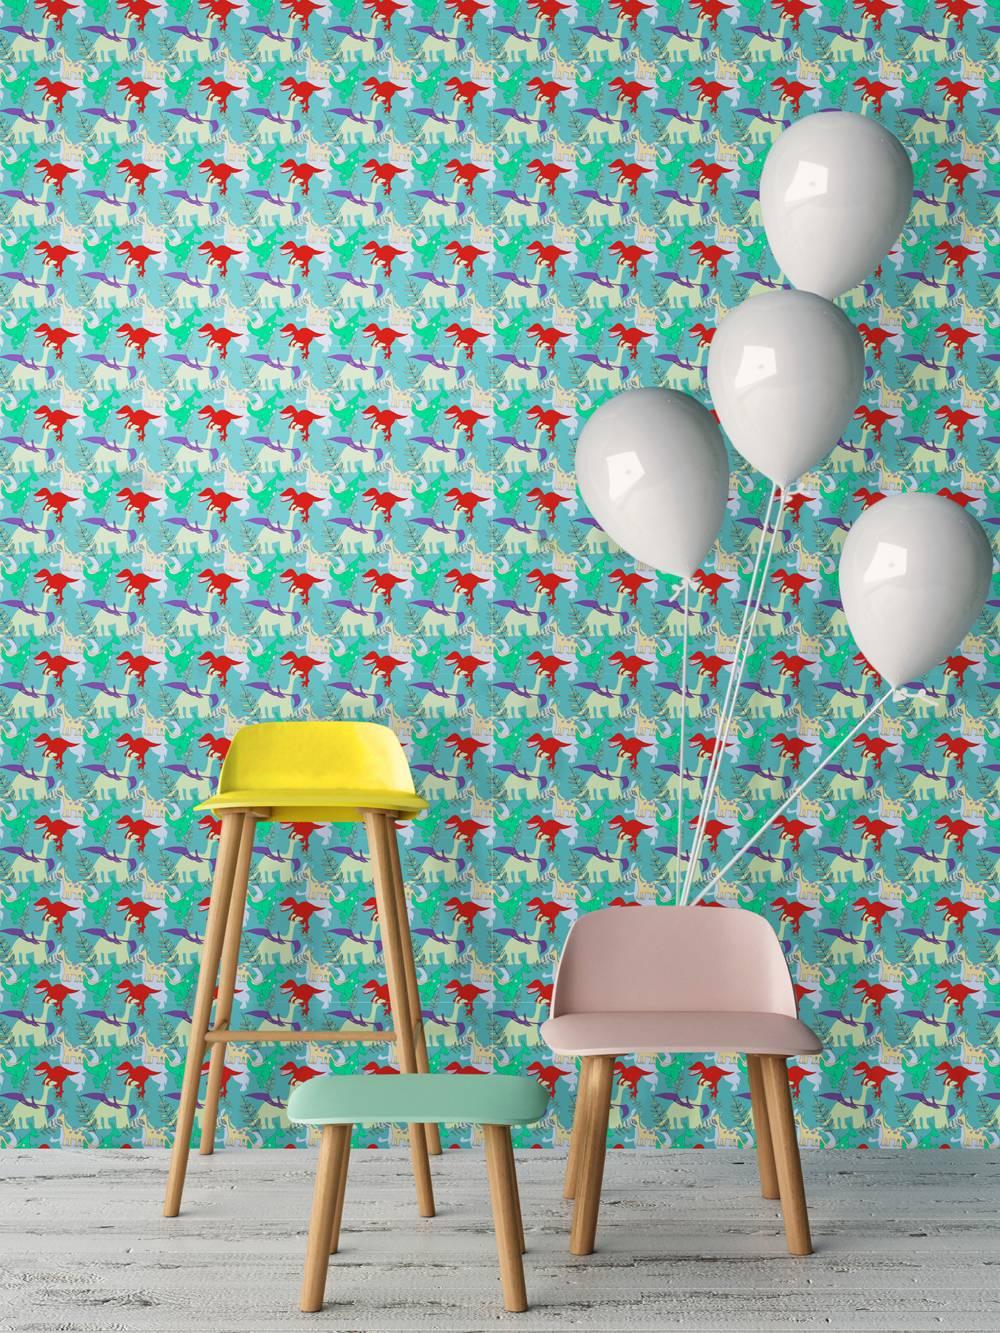 Jurassic Wallpaper is created By Ali Burnett for Flat Space Design. 

This is from the for the Very Young Collection.

Available in two different colors: green and white

£80 pounds per linear metre. Min order 5 liner metres. 

Ali Burnett